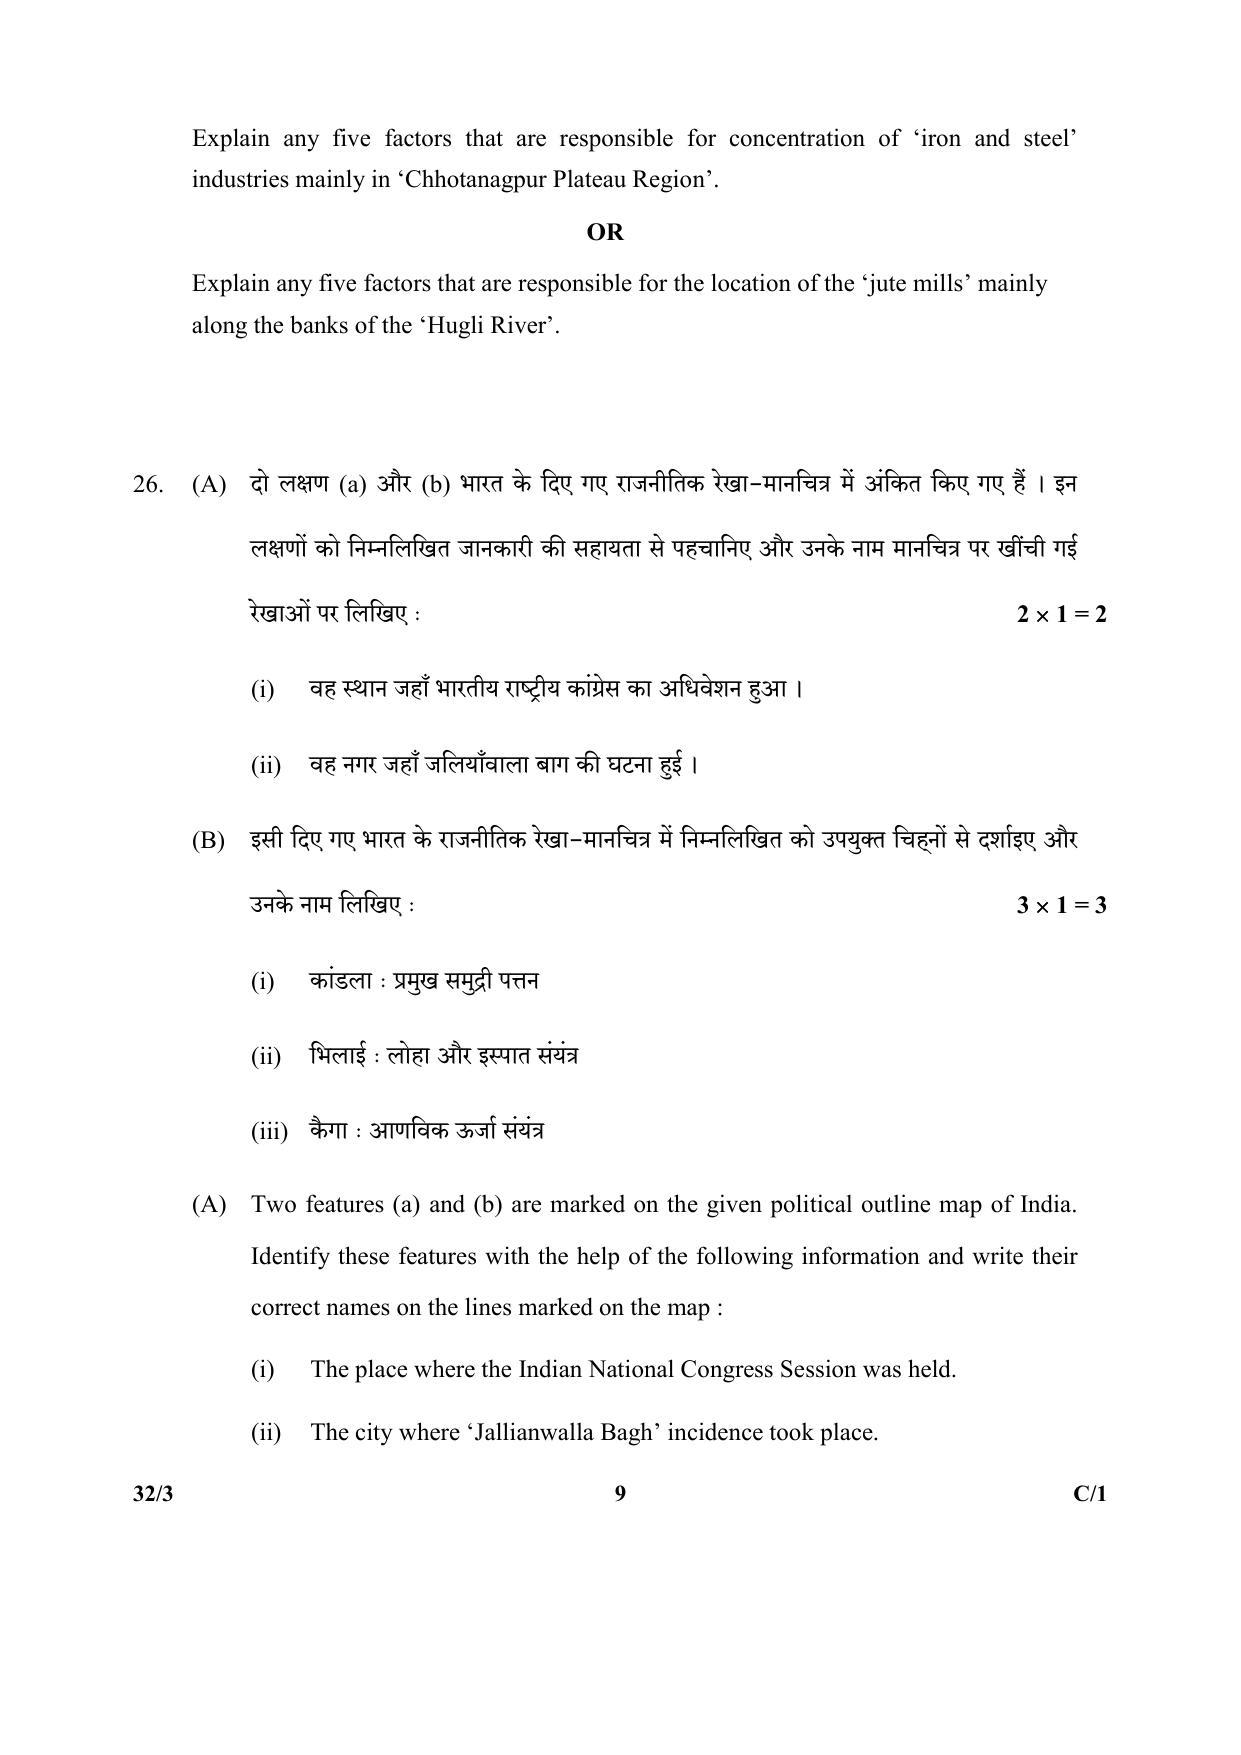 CBSE Class 10 32-3_Social Science 2018 Compartment Question Paper - Page 9